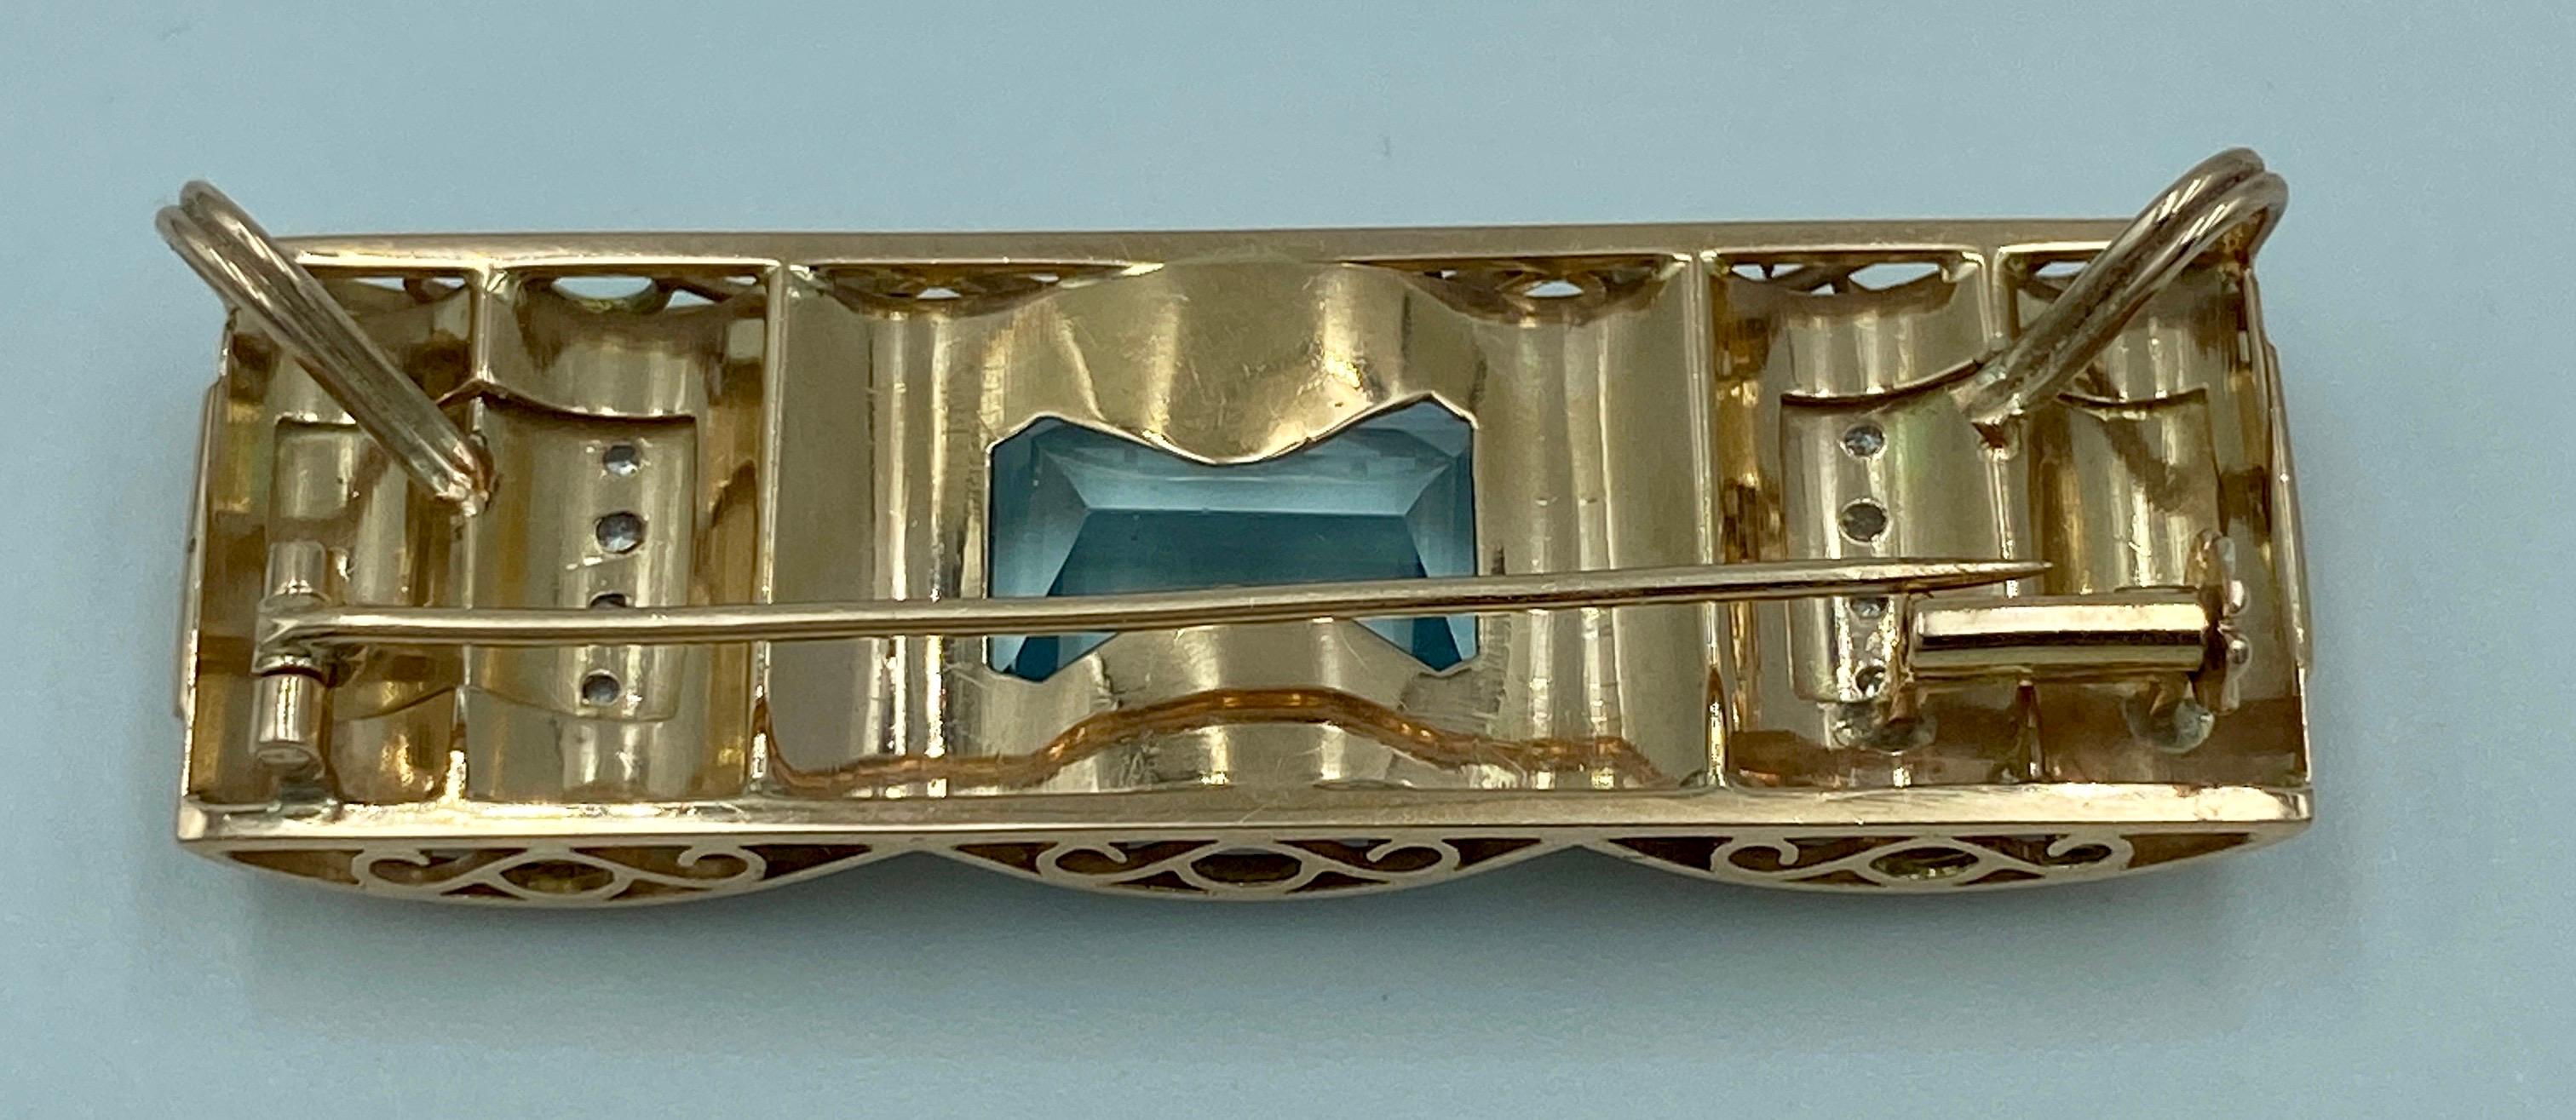 Modern 1950s French 18 carat gold aquamarine and diamond brooch  For Sale